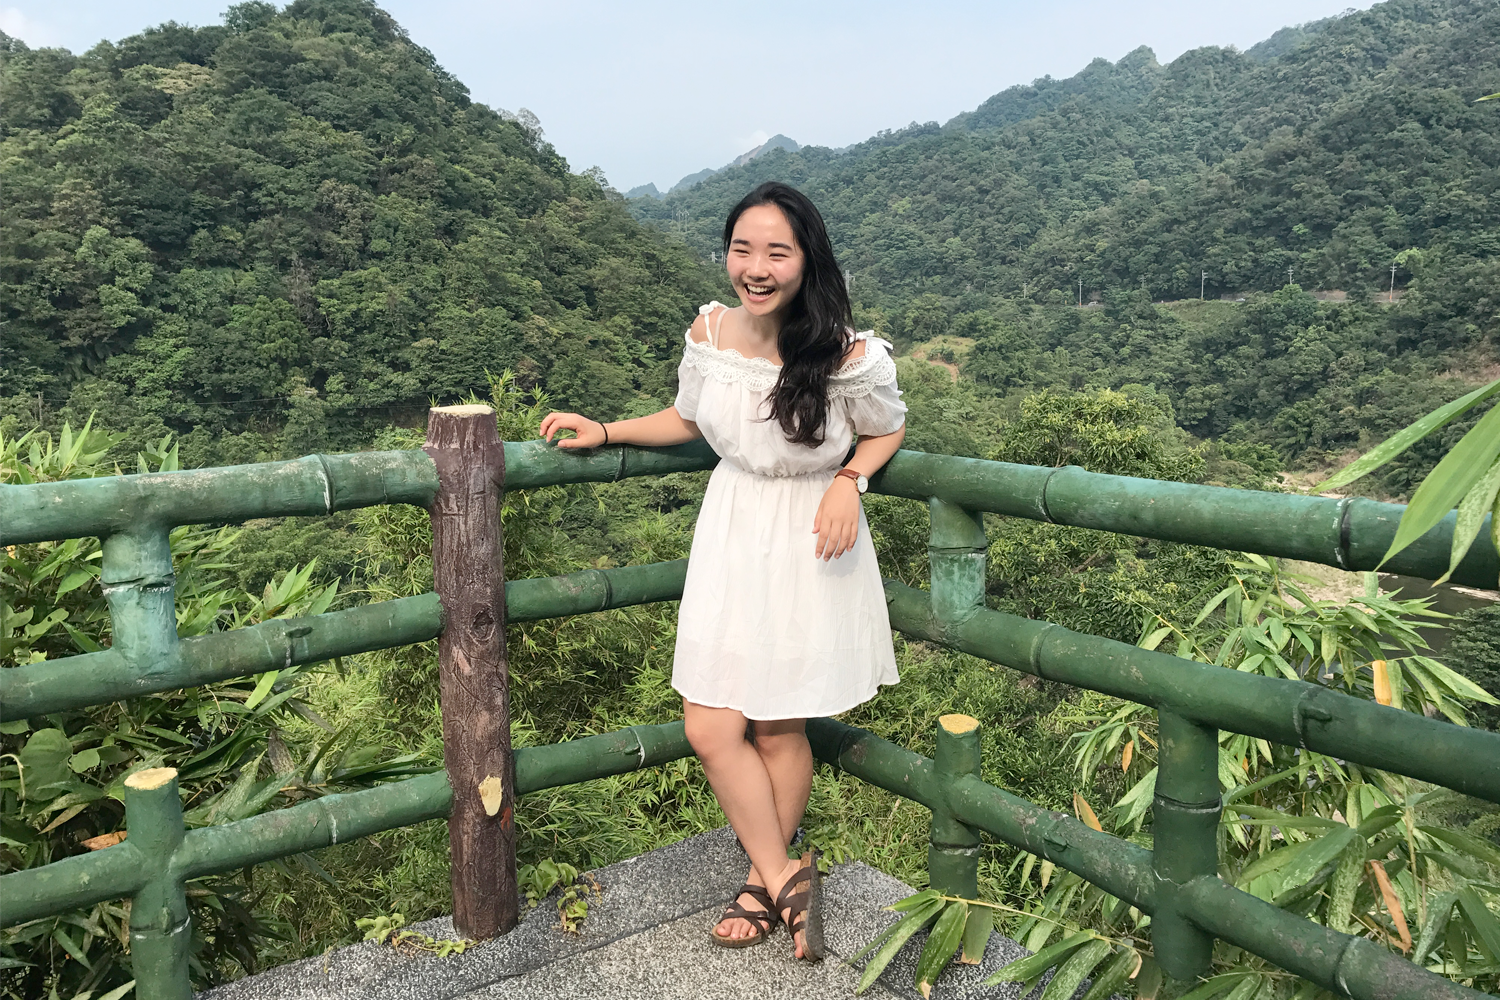 Exploring the great outdoors in Taiwan